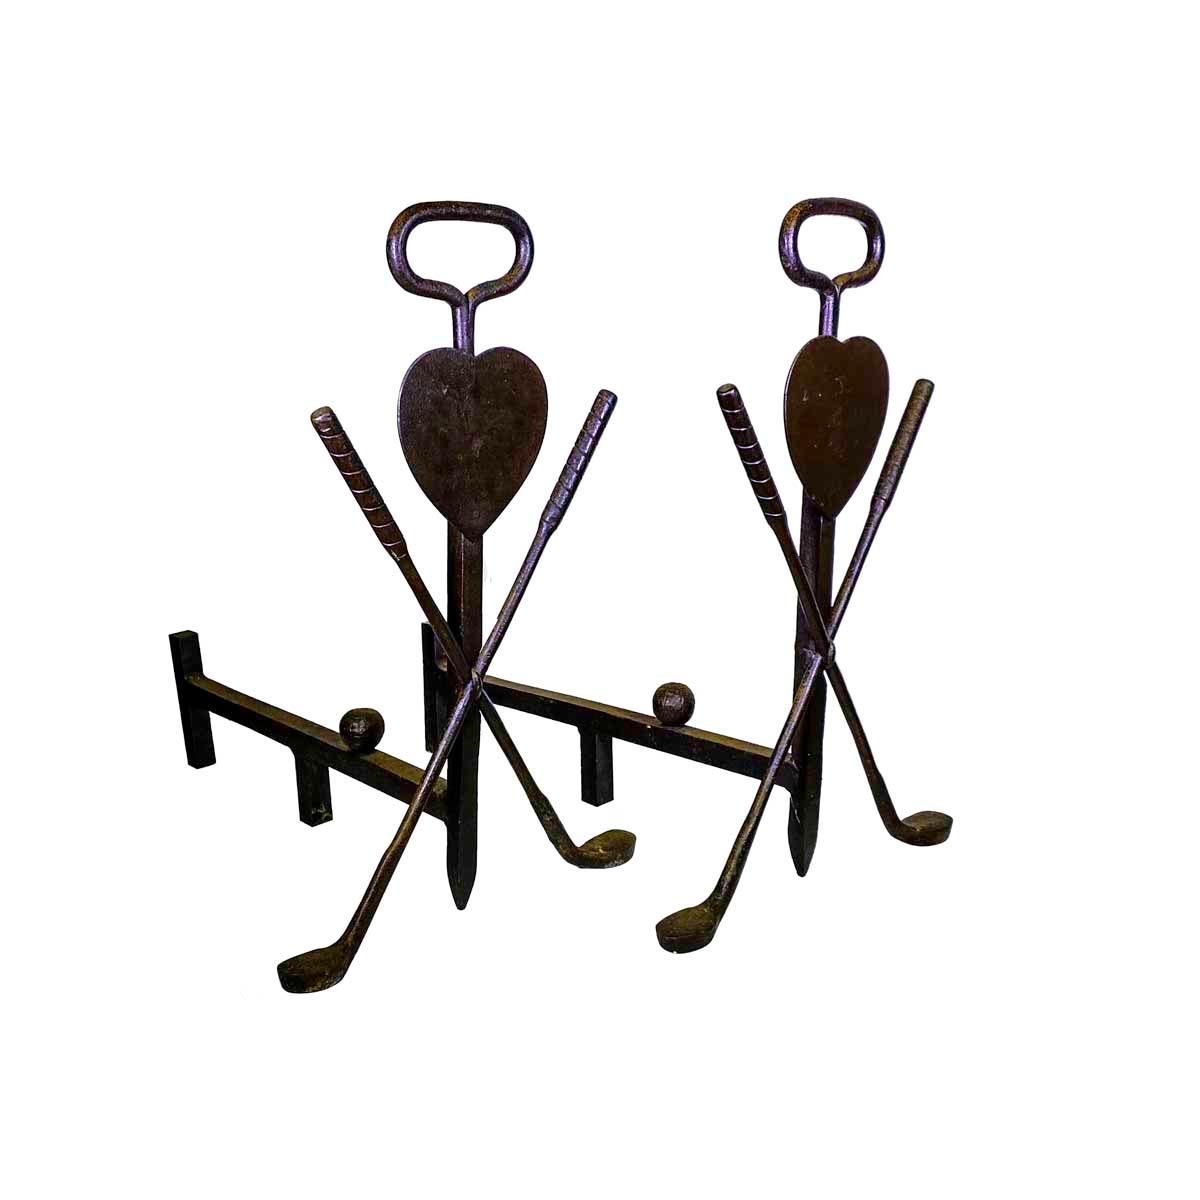 Pair of 20th century, Folk Art, golf themed andirons, having a central shaft with a loop handle and a pair of golf clubs centering a heart, the forward log stop is in the form of a golf ball. Made of wrought iron they appear to be blacksmith made.